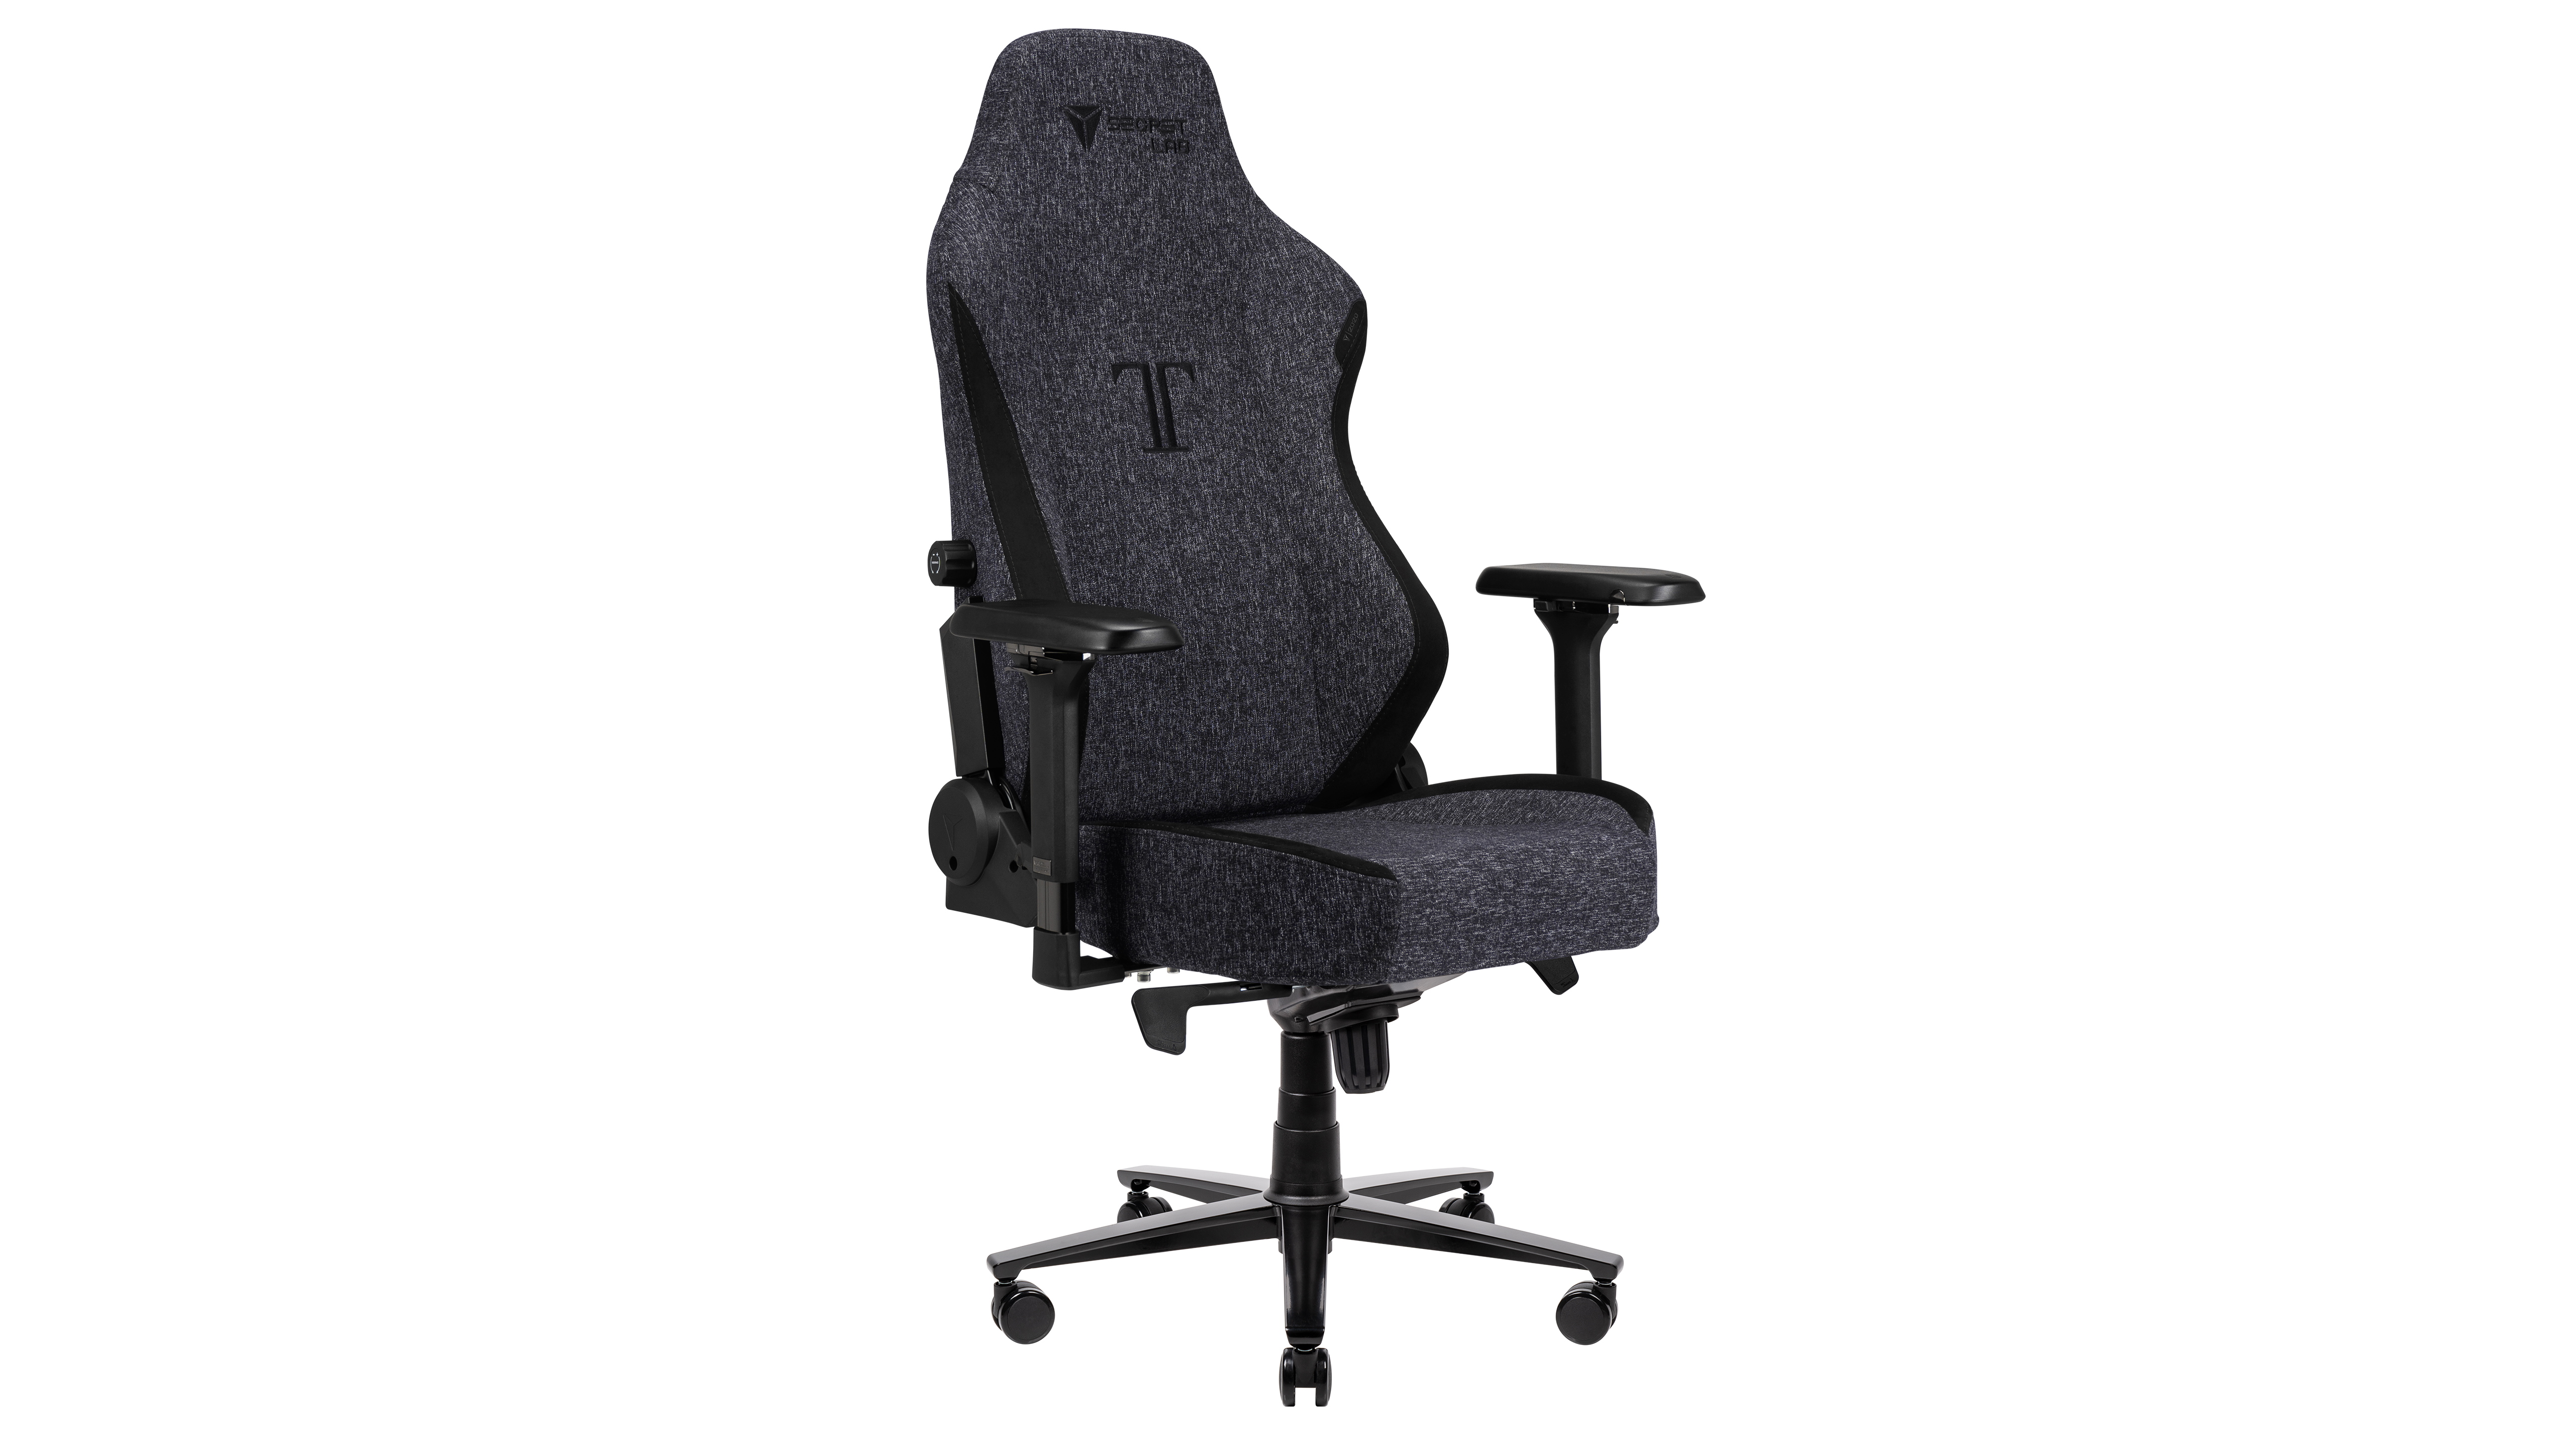 Secretlab Titan best gaming chair at an angle on a white background